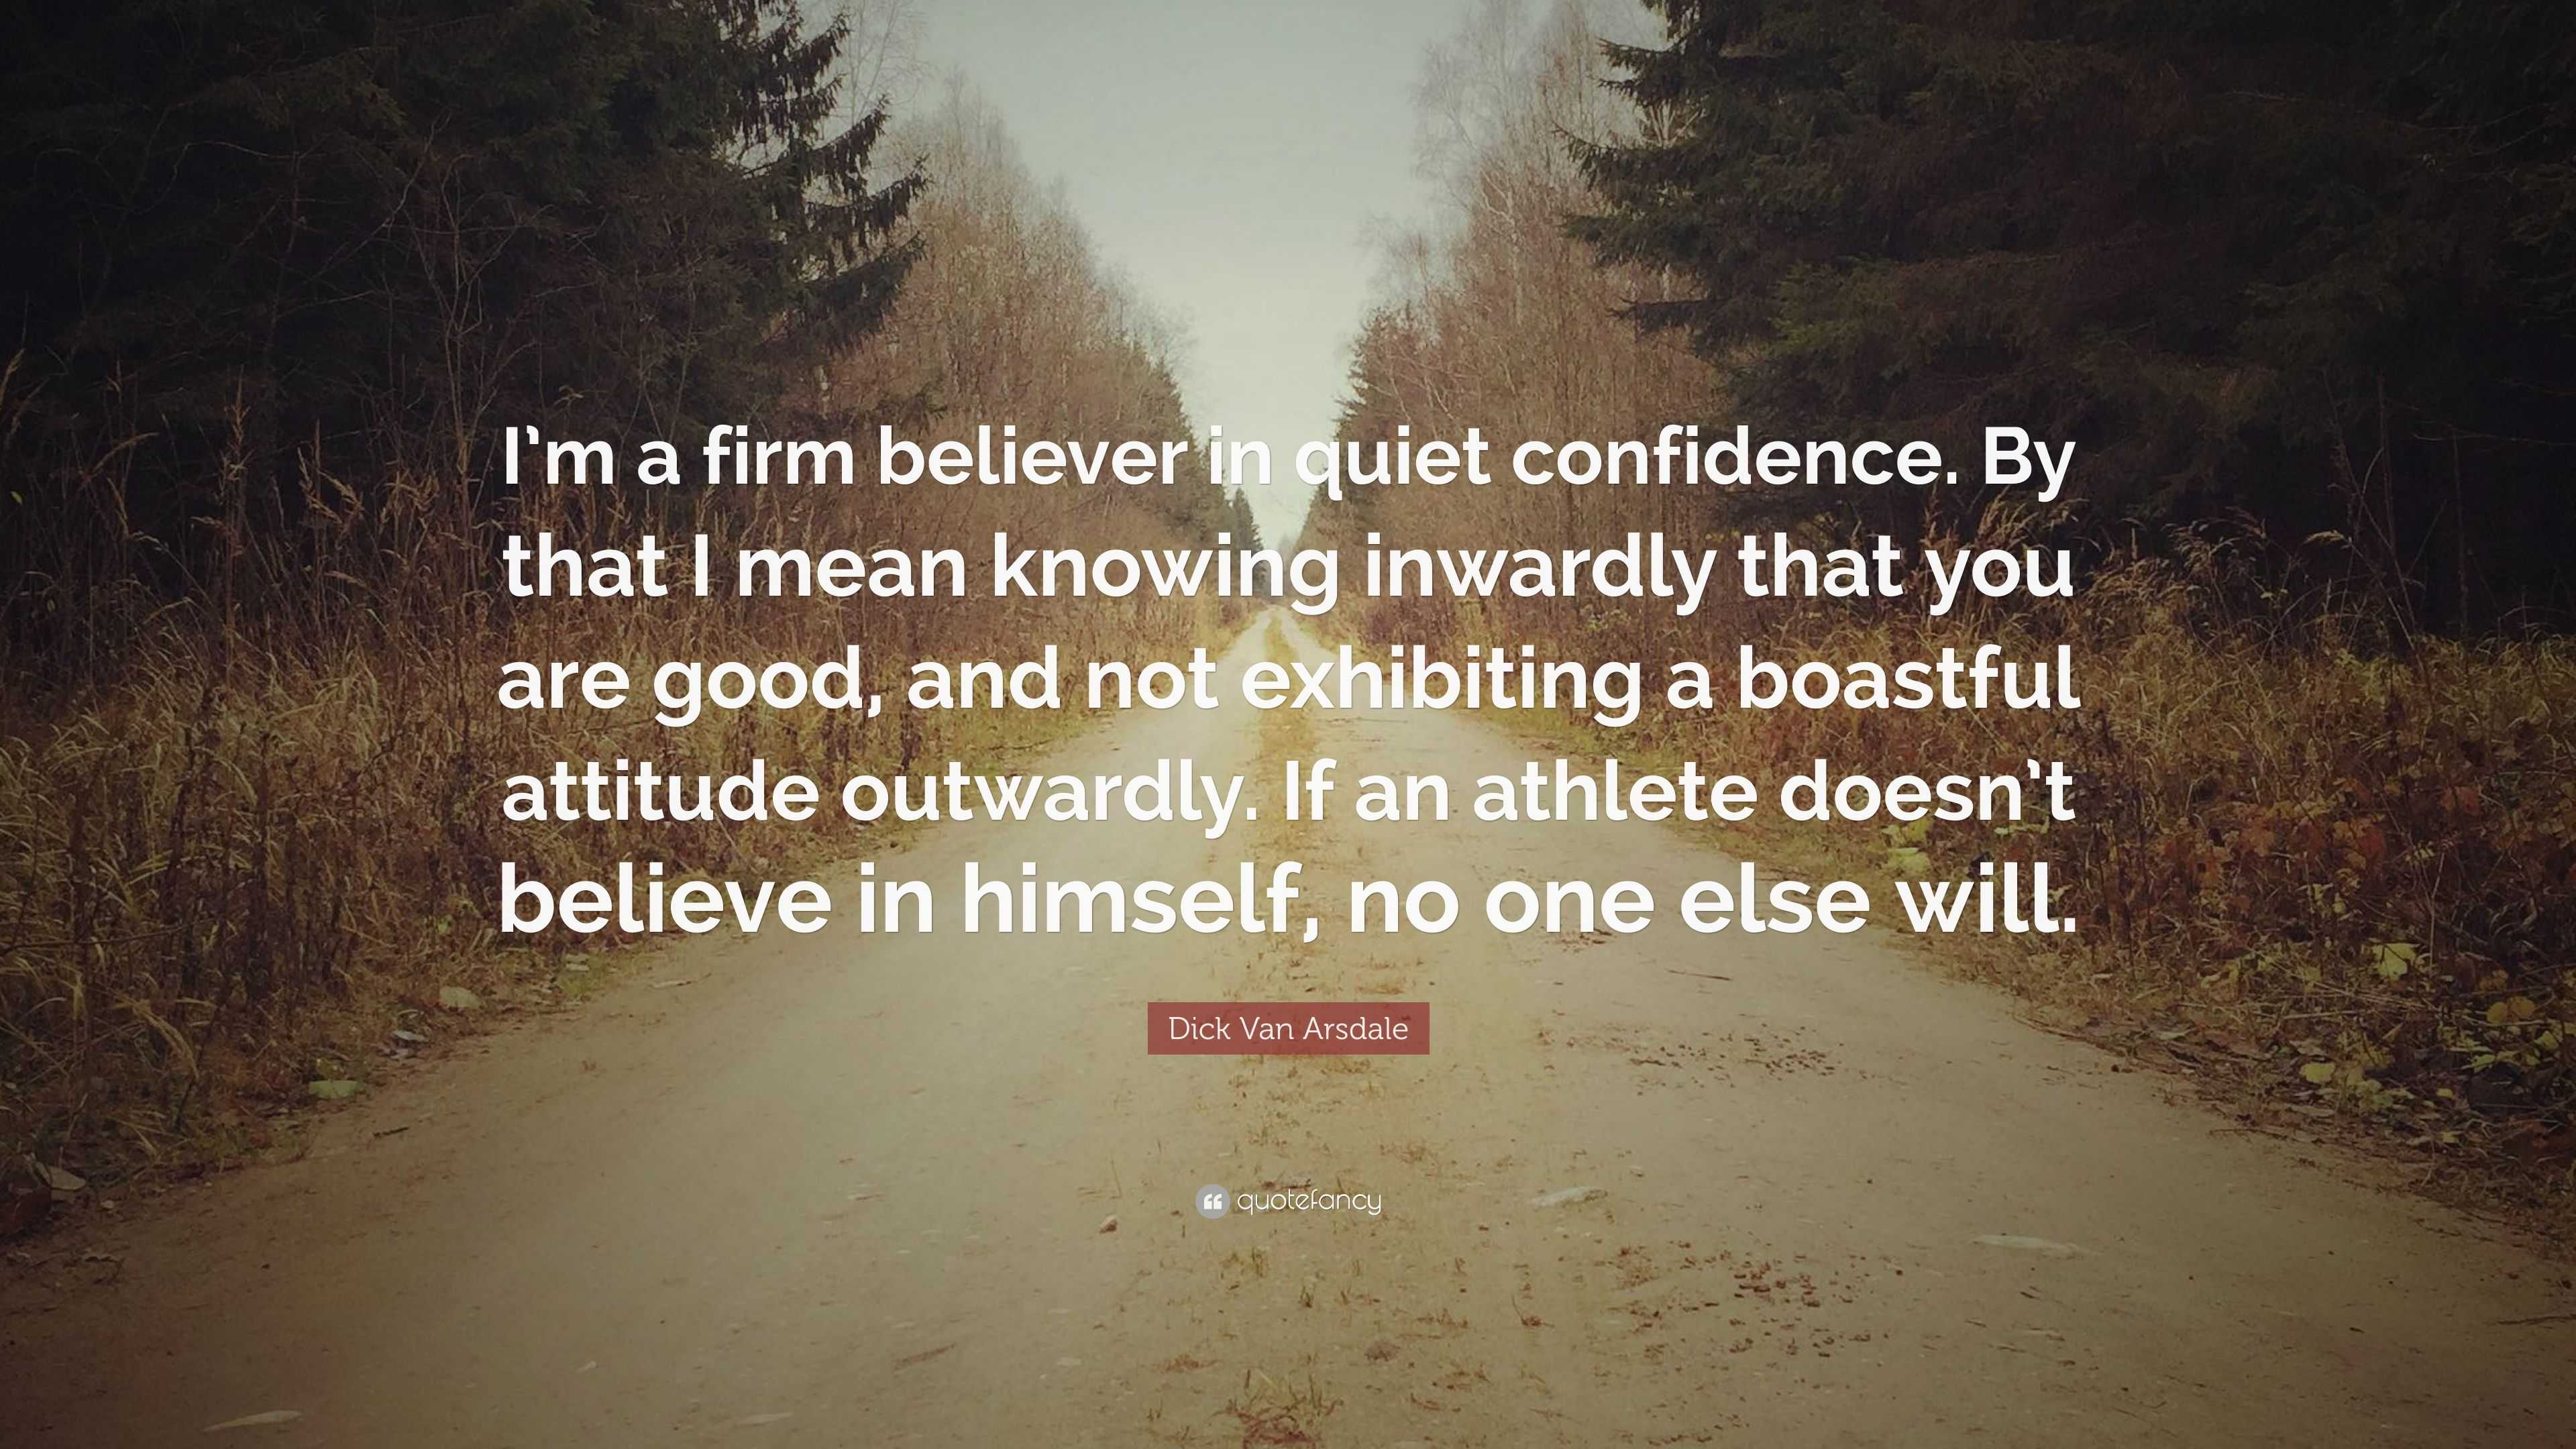 Dick Van Arsdale Quote: “I'm a firm believer in quiet confidence